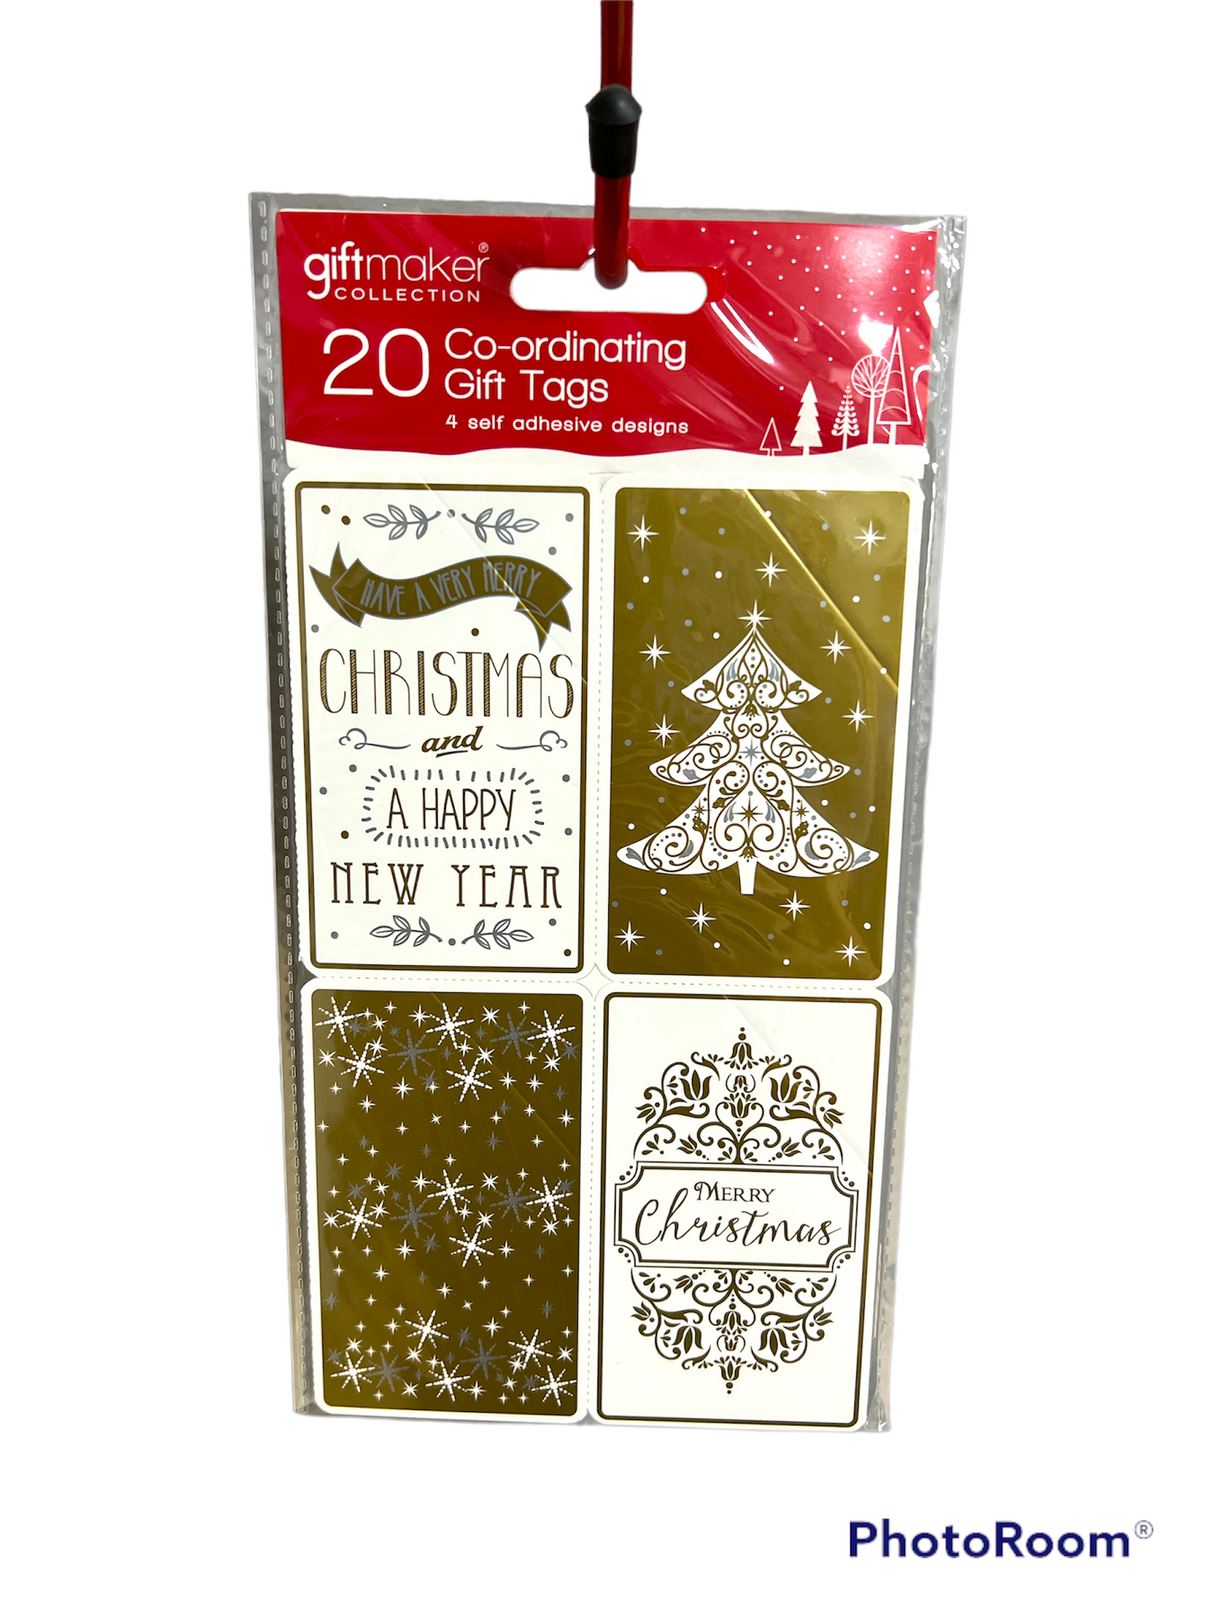 20 Co-ordinating Gift Tags